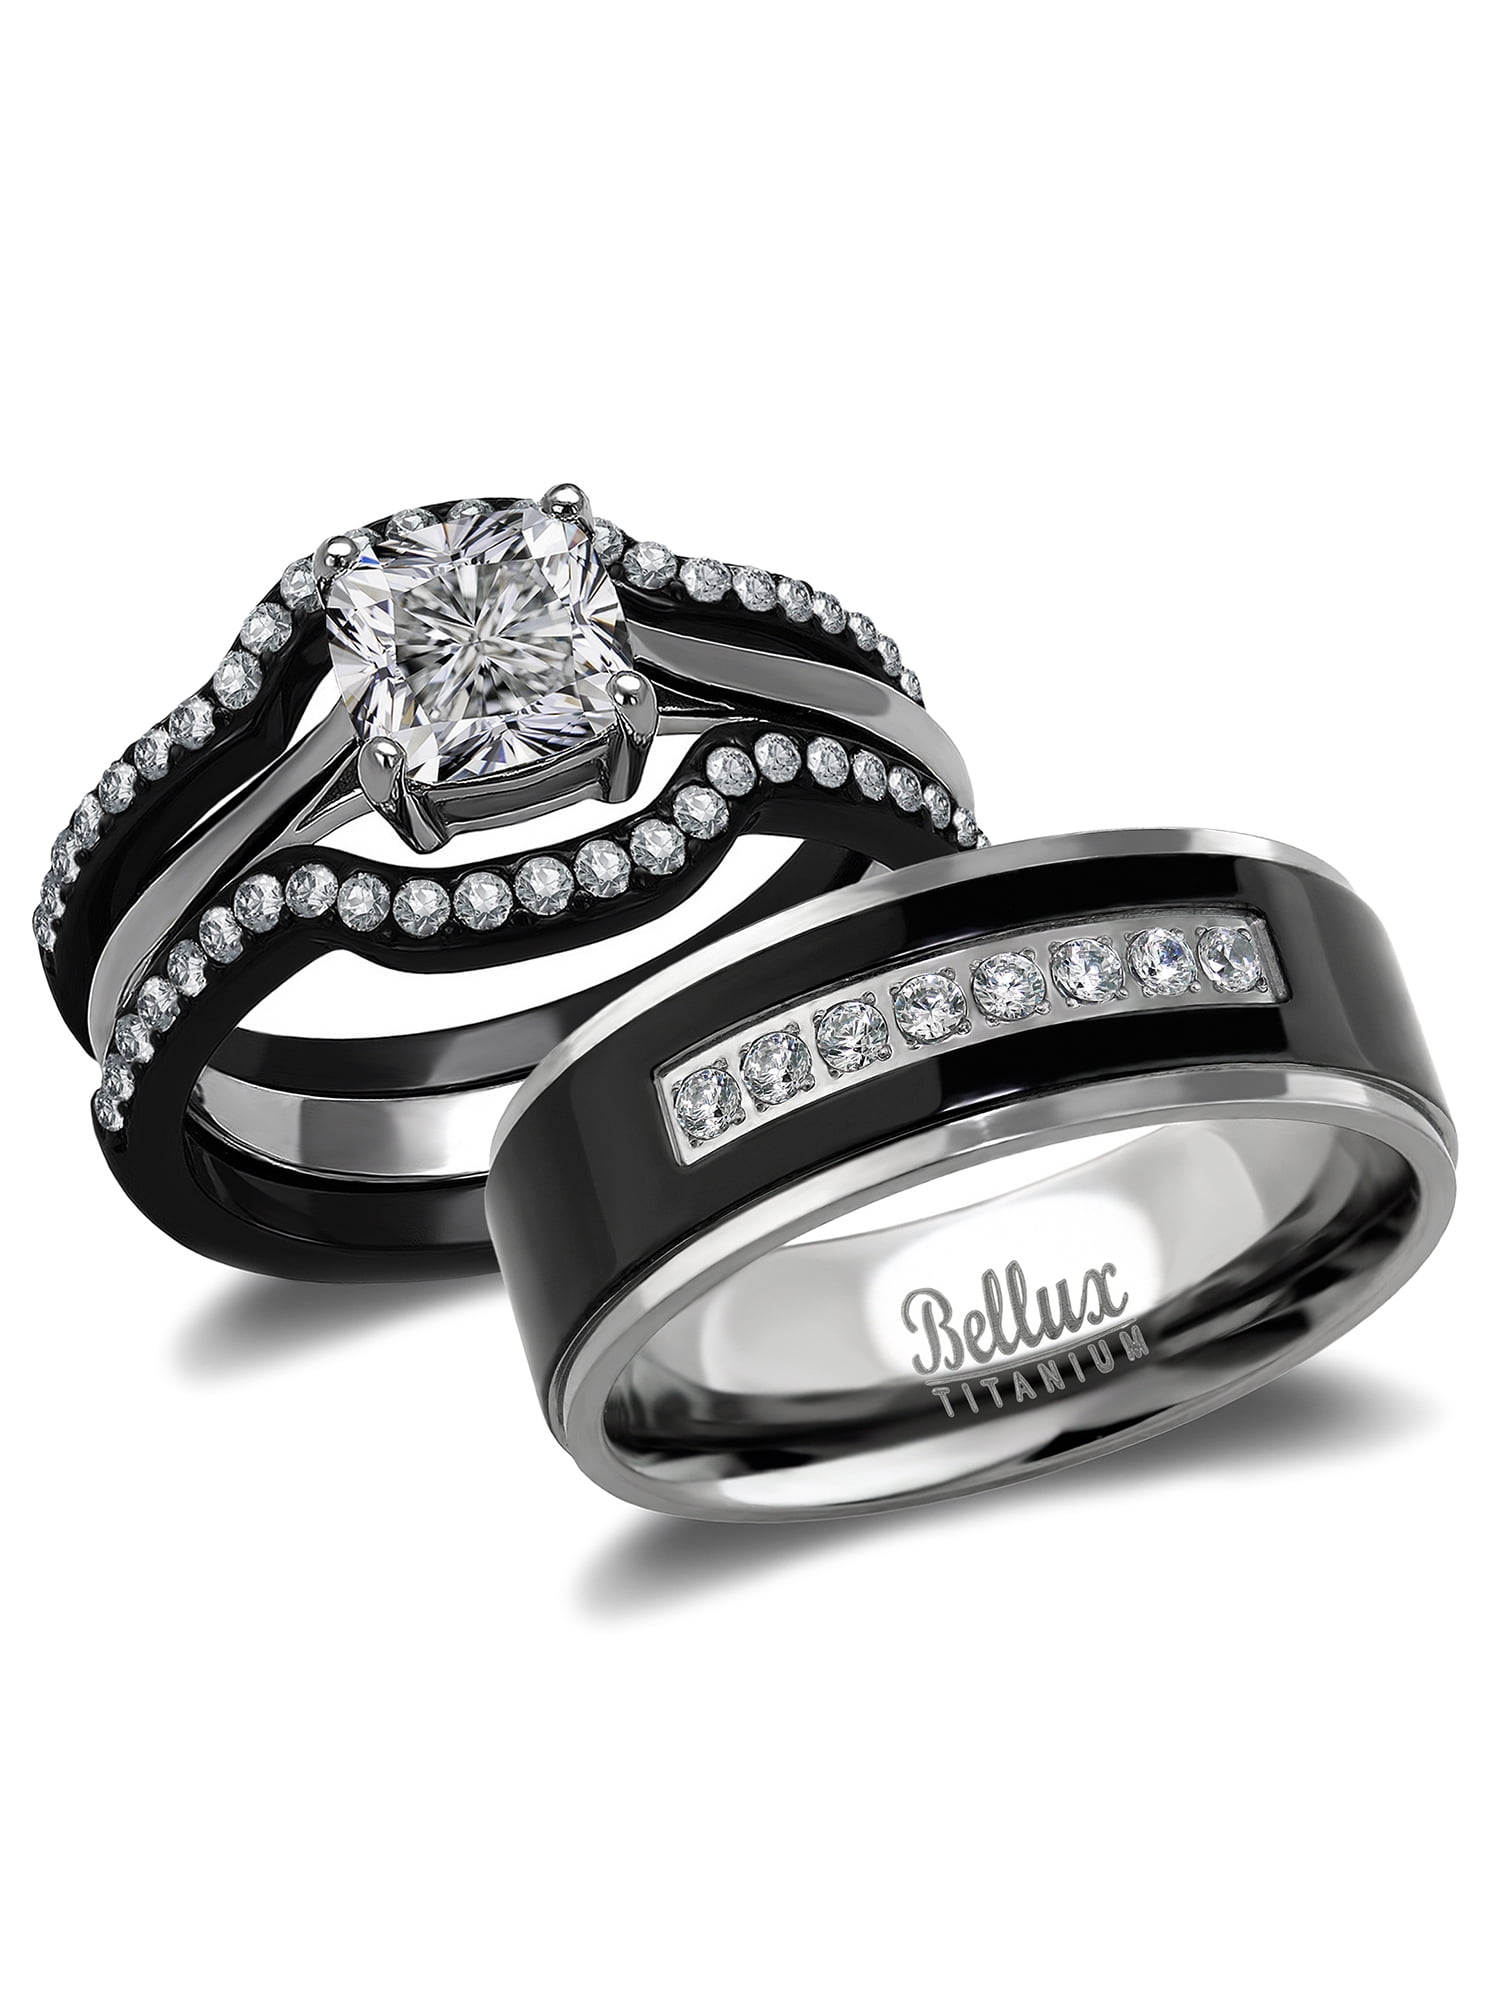 Sale > mens wedding band sets > is stock